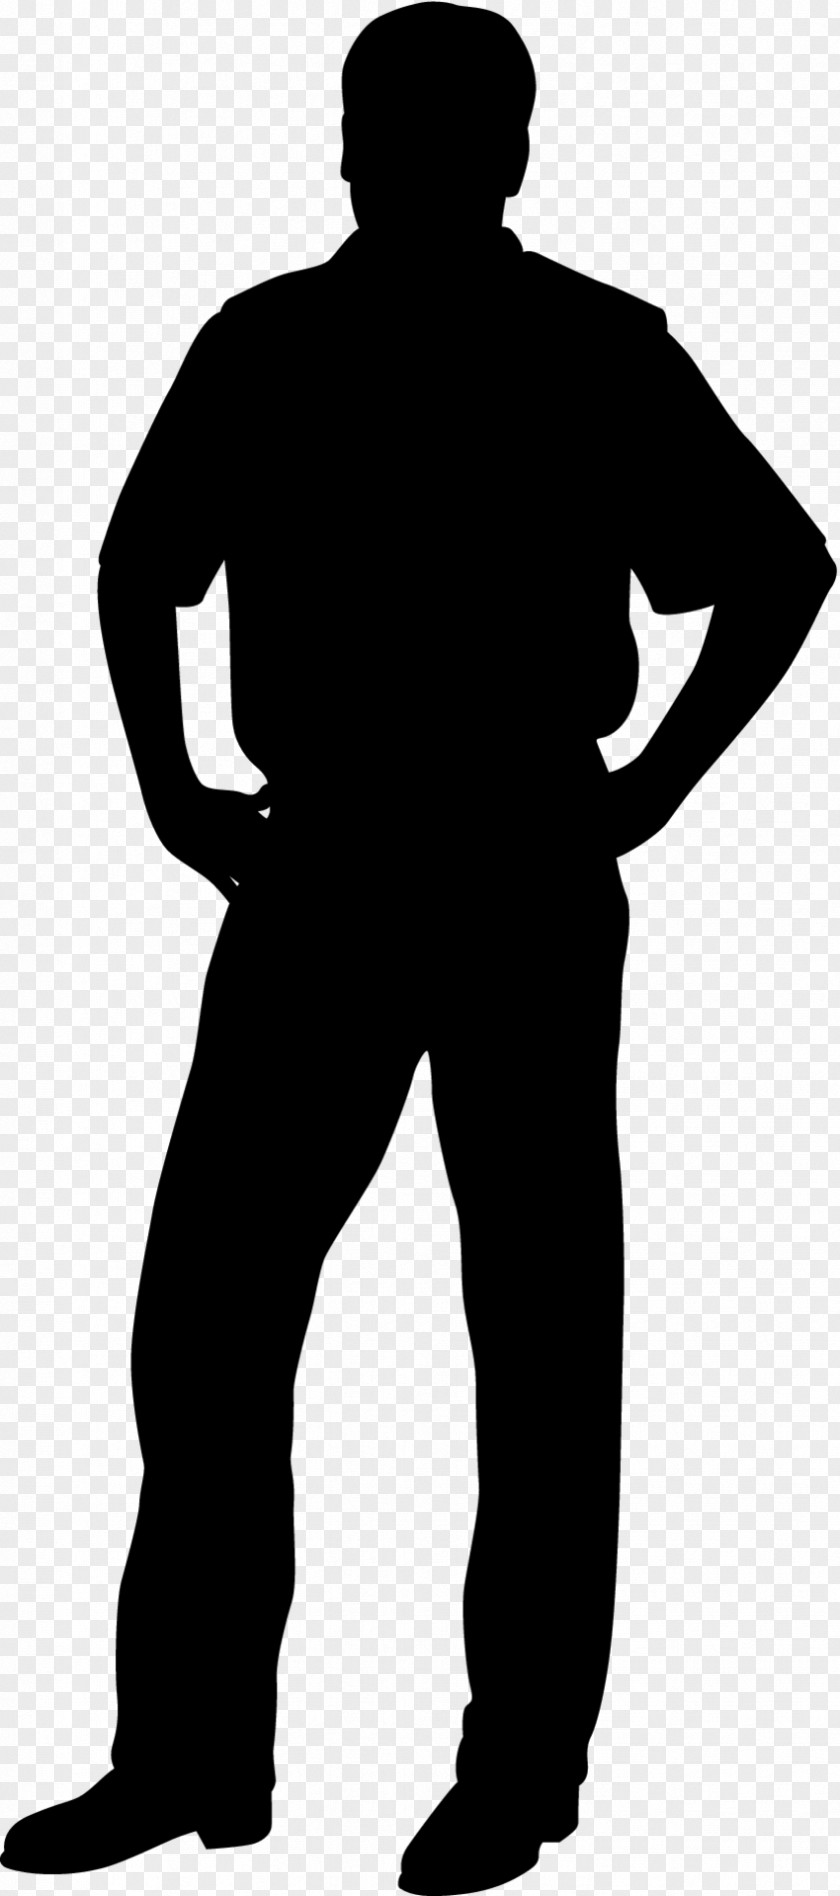 Man Silhouette Stock Photography PNG